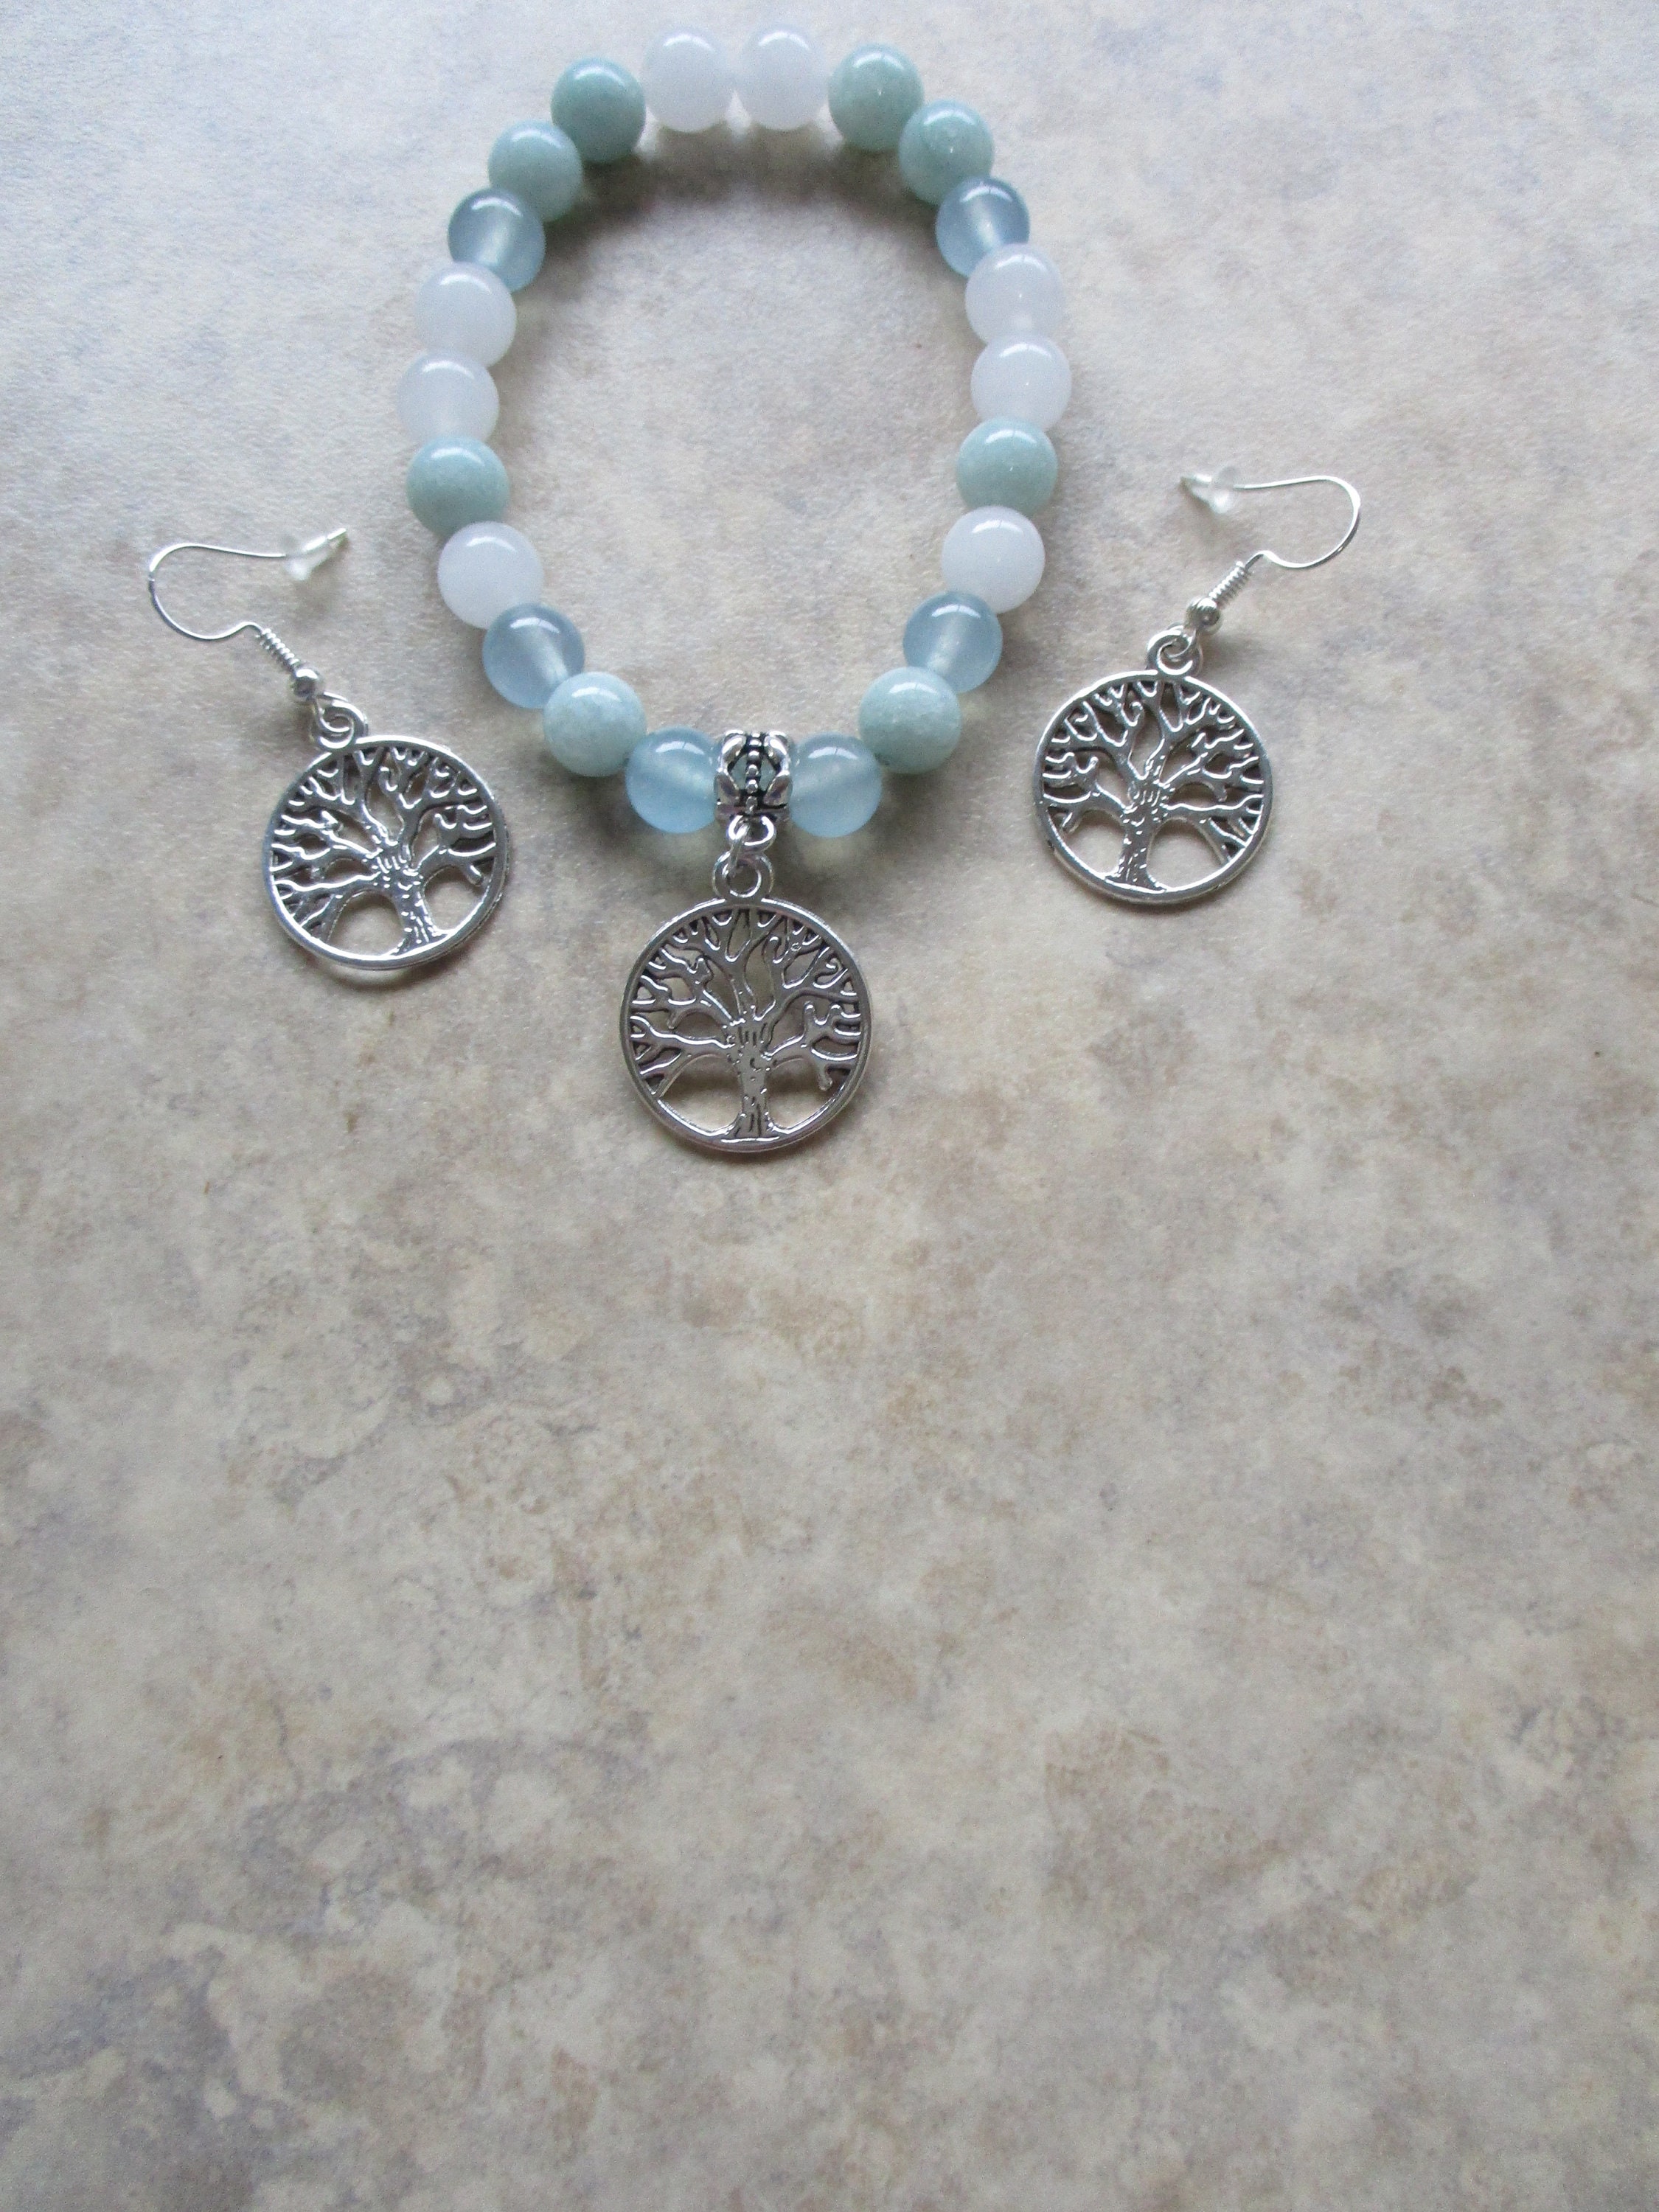 Stress/anxiety Bracelet With Tree of Life Earring's This is A Lovely Family  Set to Give as A Special Gift. Awesome Soft Tone Color Mix. 